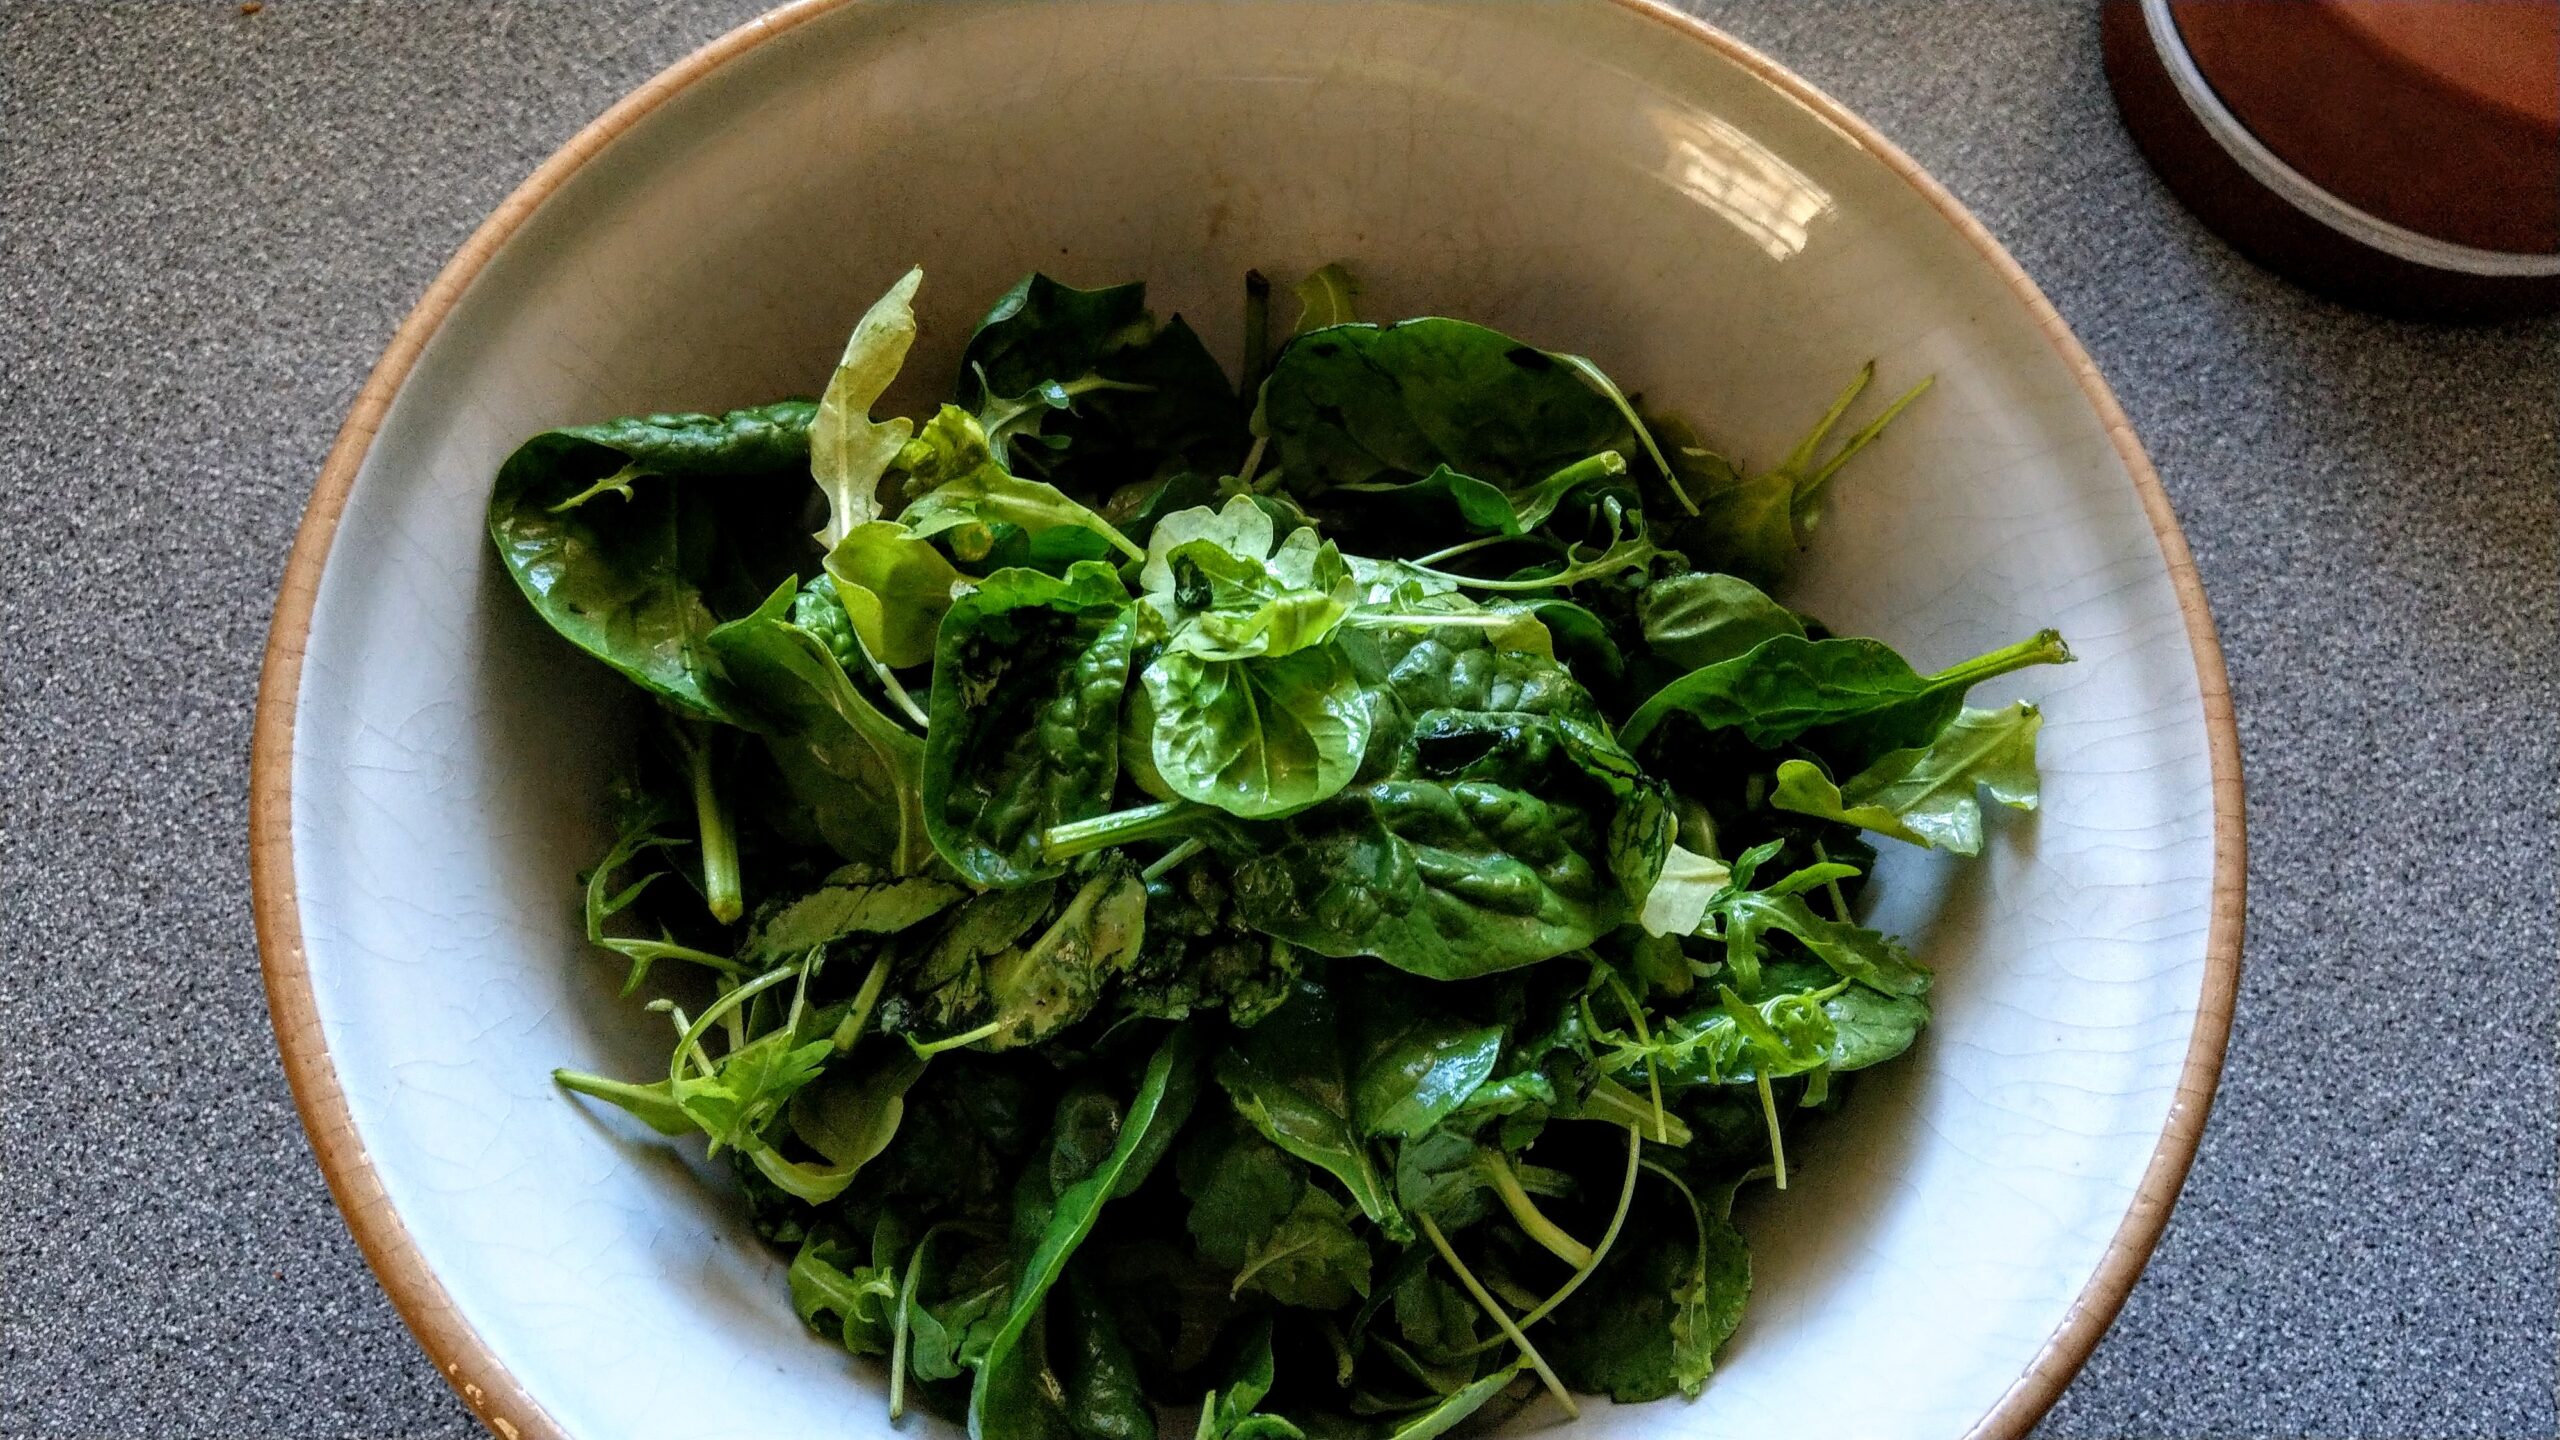 Washed baby spinach, rocket, and lamb's lettuce